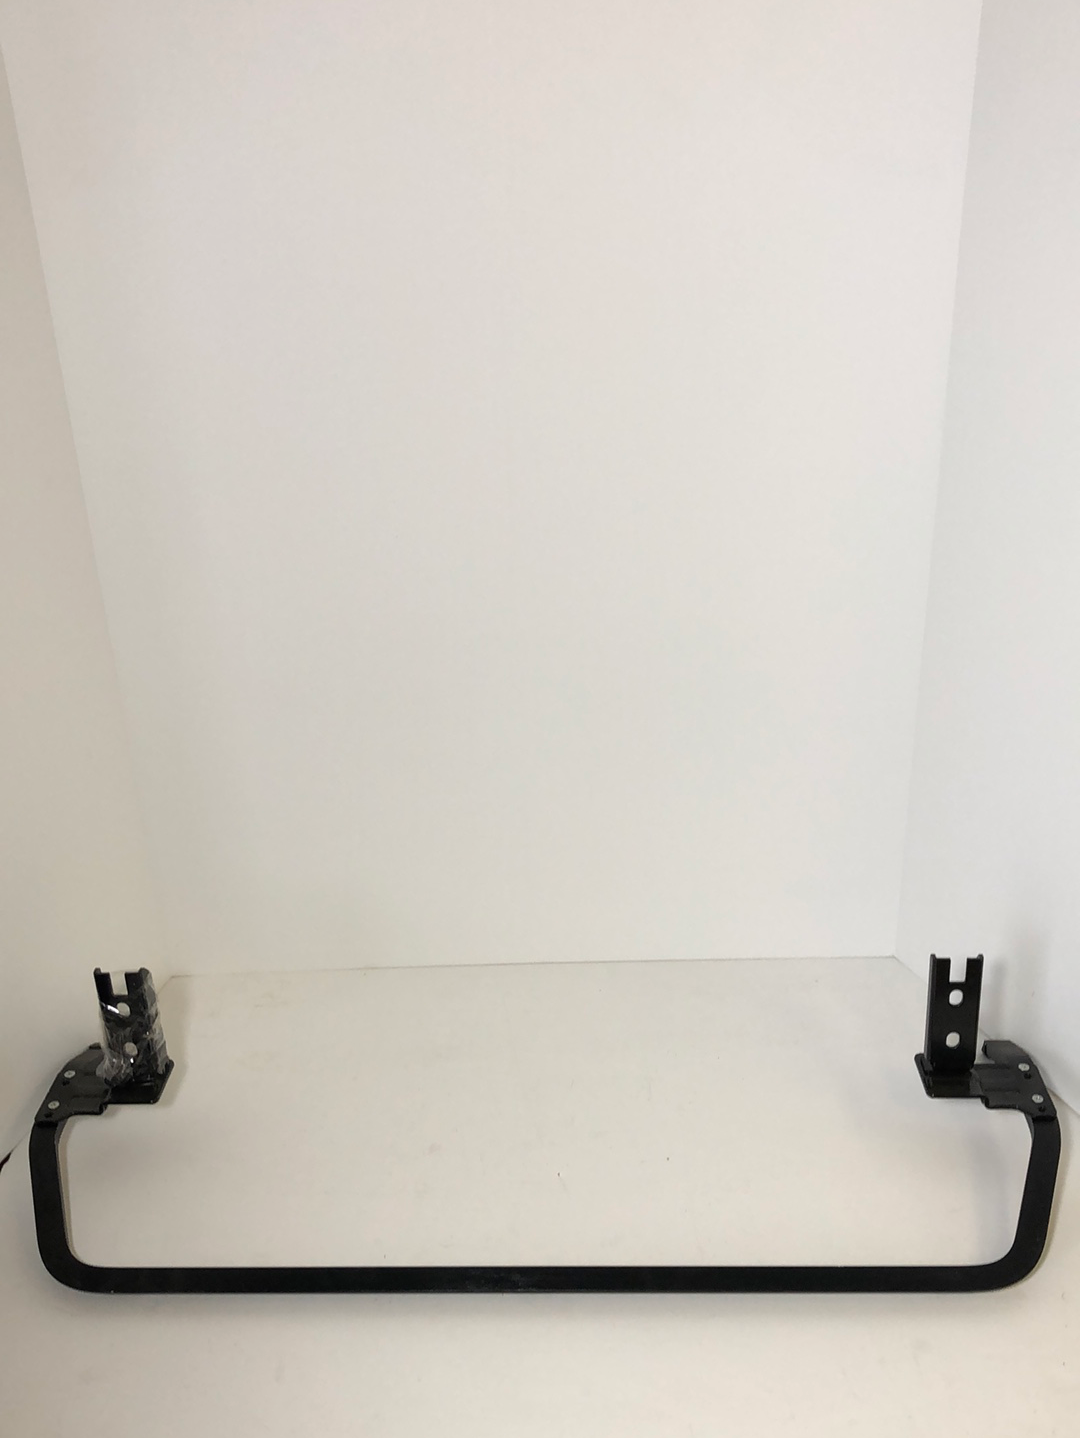 Sony XBR-55X810C TV Stand/Base